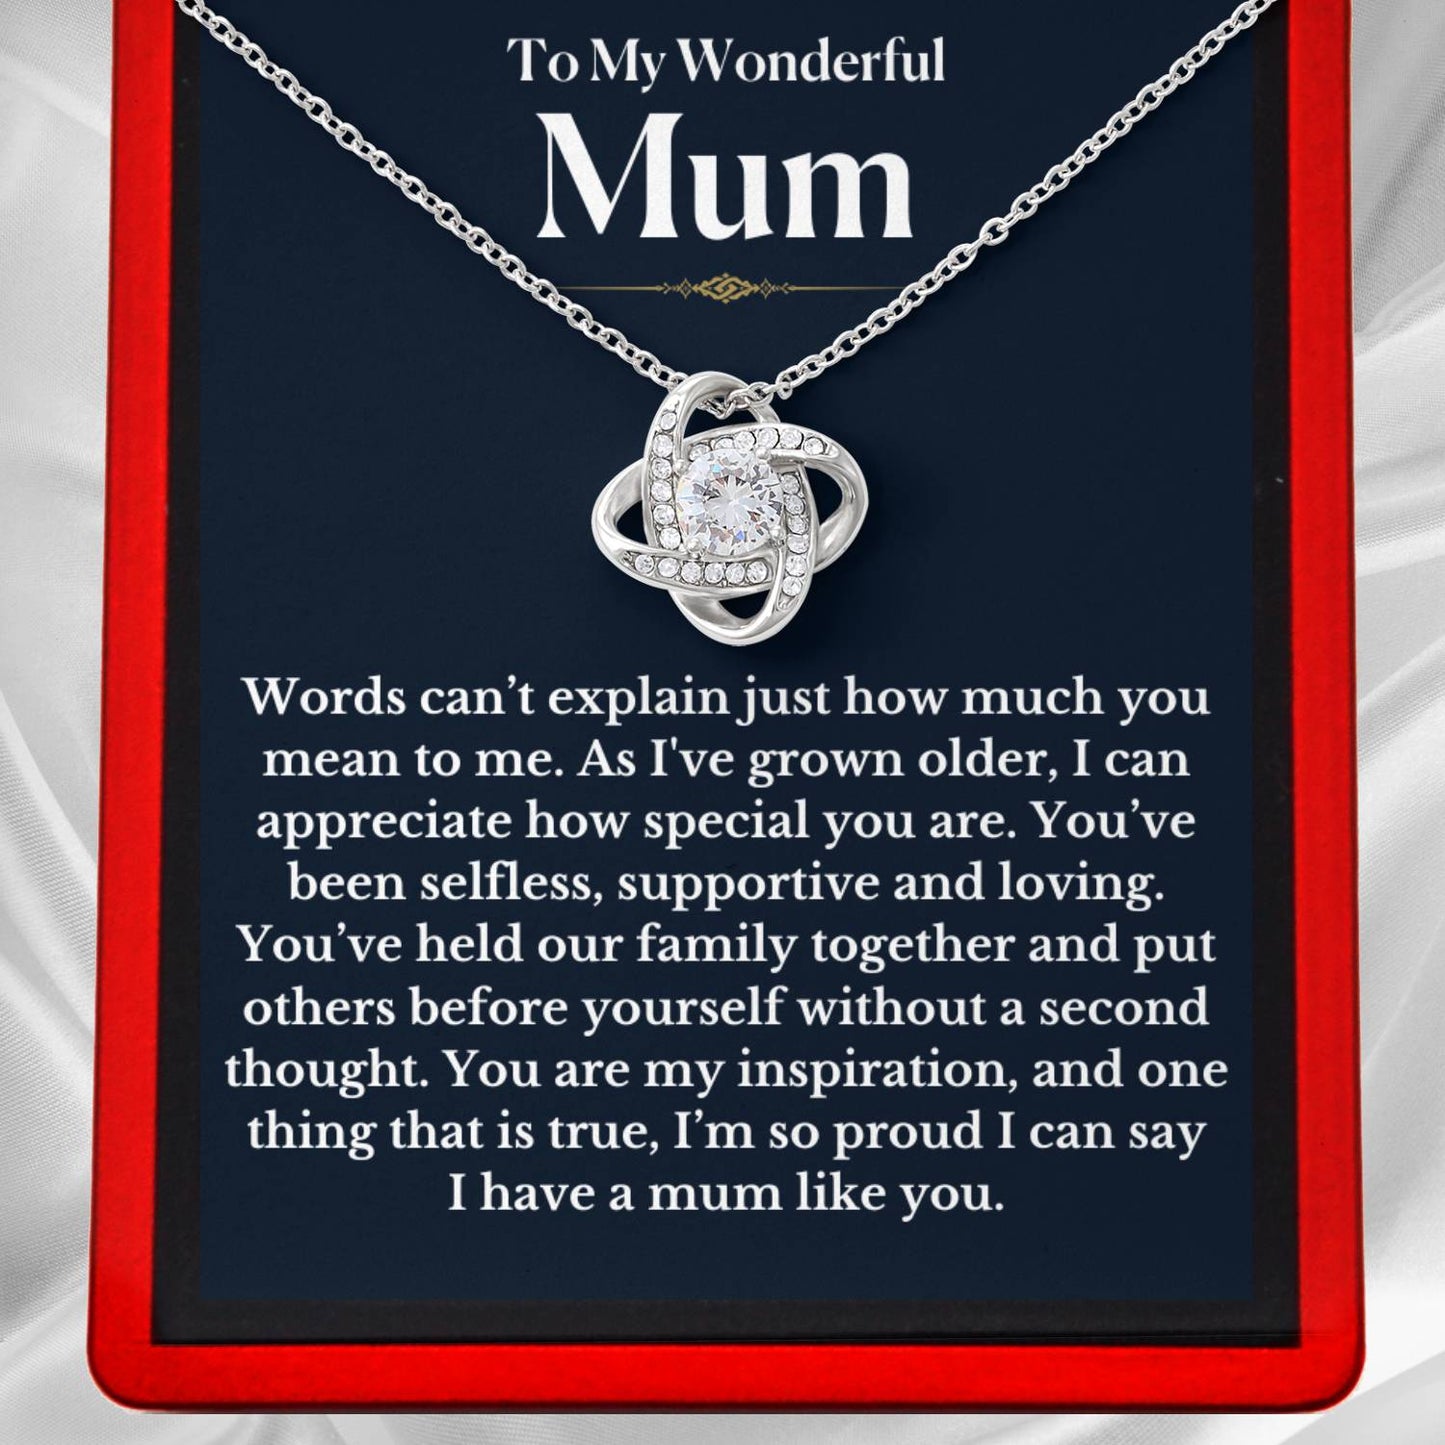 Proud To Have A Mum Like You - Mum30